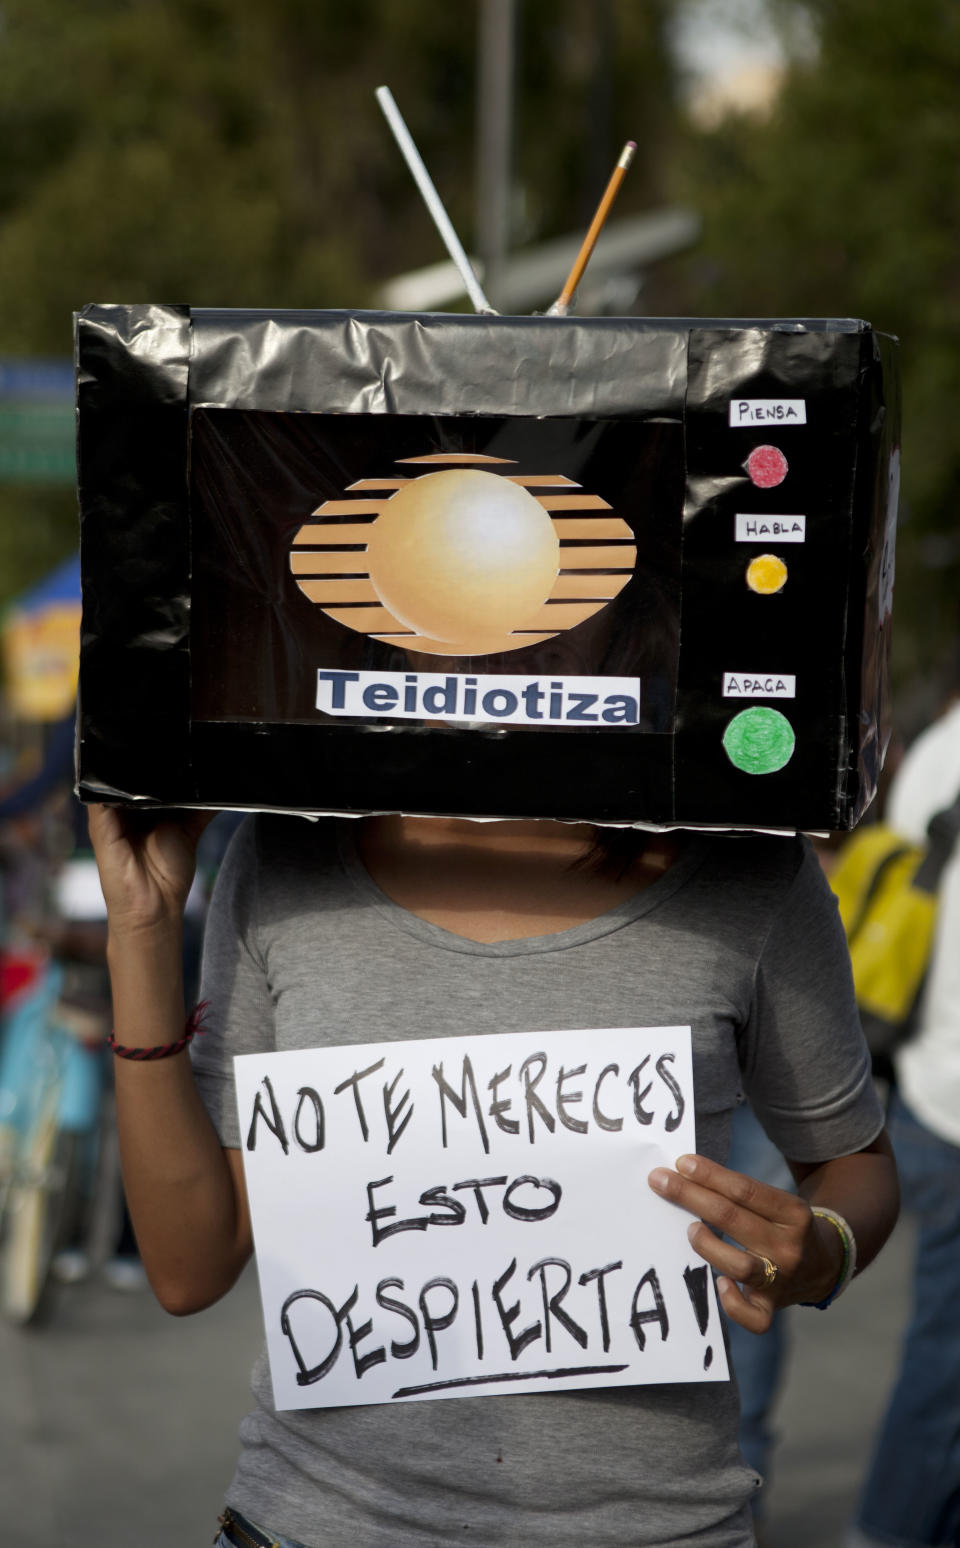 A student holds signs during a demonstration to protest a possible return of the old ruling Institutional Revolutionary Party (PRI) and against what they perceive as a biased coverage by major Mexican TV networks directed in favor of PRI's candidate Enrique Pena Nieto in Mexico City, Wednesday, May 23, 2012. The sign reads in Spanish: "You don't deserve it, wake-up!". Mexico will hold presidential elections on July 1. (AP Photo/Eduardo Verdugo)